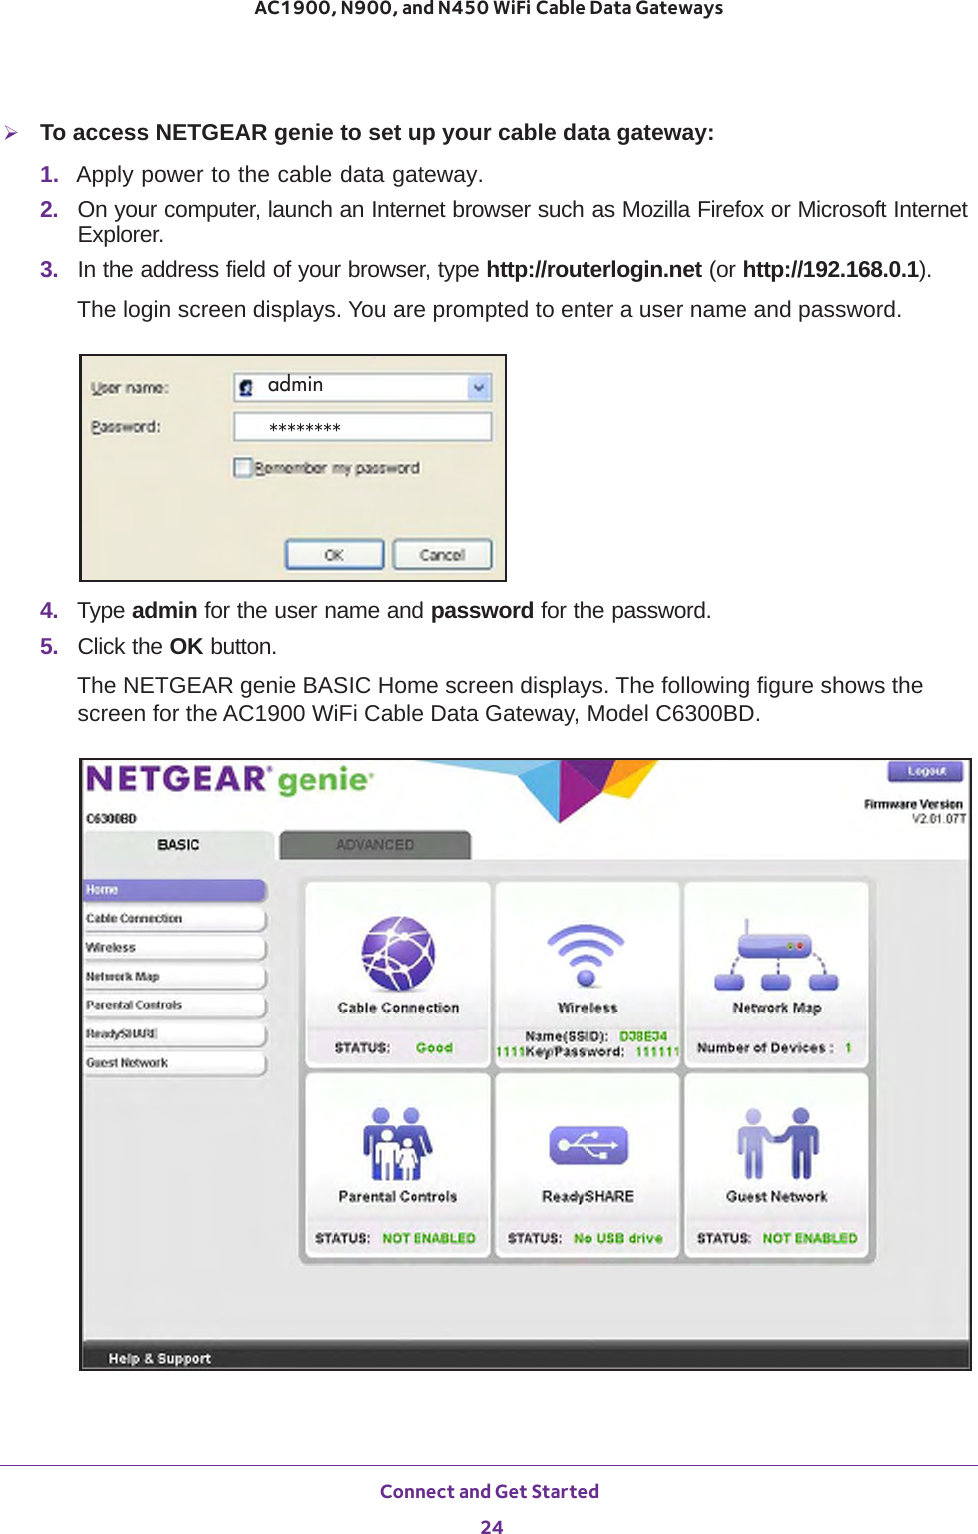 Connect and Get Started 24AC1900, N900, and N450 WiFi Cable Data Gateways To access NETGEAR genie to set up your cable data gateway:1.  Apply power to the cable data gateway.2.  On your computer, launch an Internet browser such as Mozilla Firefox or Microsoft Internet Explorer. 3.  In the address field of your browser, type http://routerlogin.net (or http://192.168.0.1).The login screen displays. You are prompted to enter a user name and password.admin********4.  Type admin for the user name and password for the password.5.  Click the OK button. The NETGEAR genie BASIC Home screen displays. The following figure shows the screen for the AC1900 WiFi Cable Data Gateway, Model C6300BD.